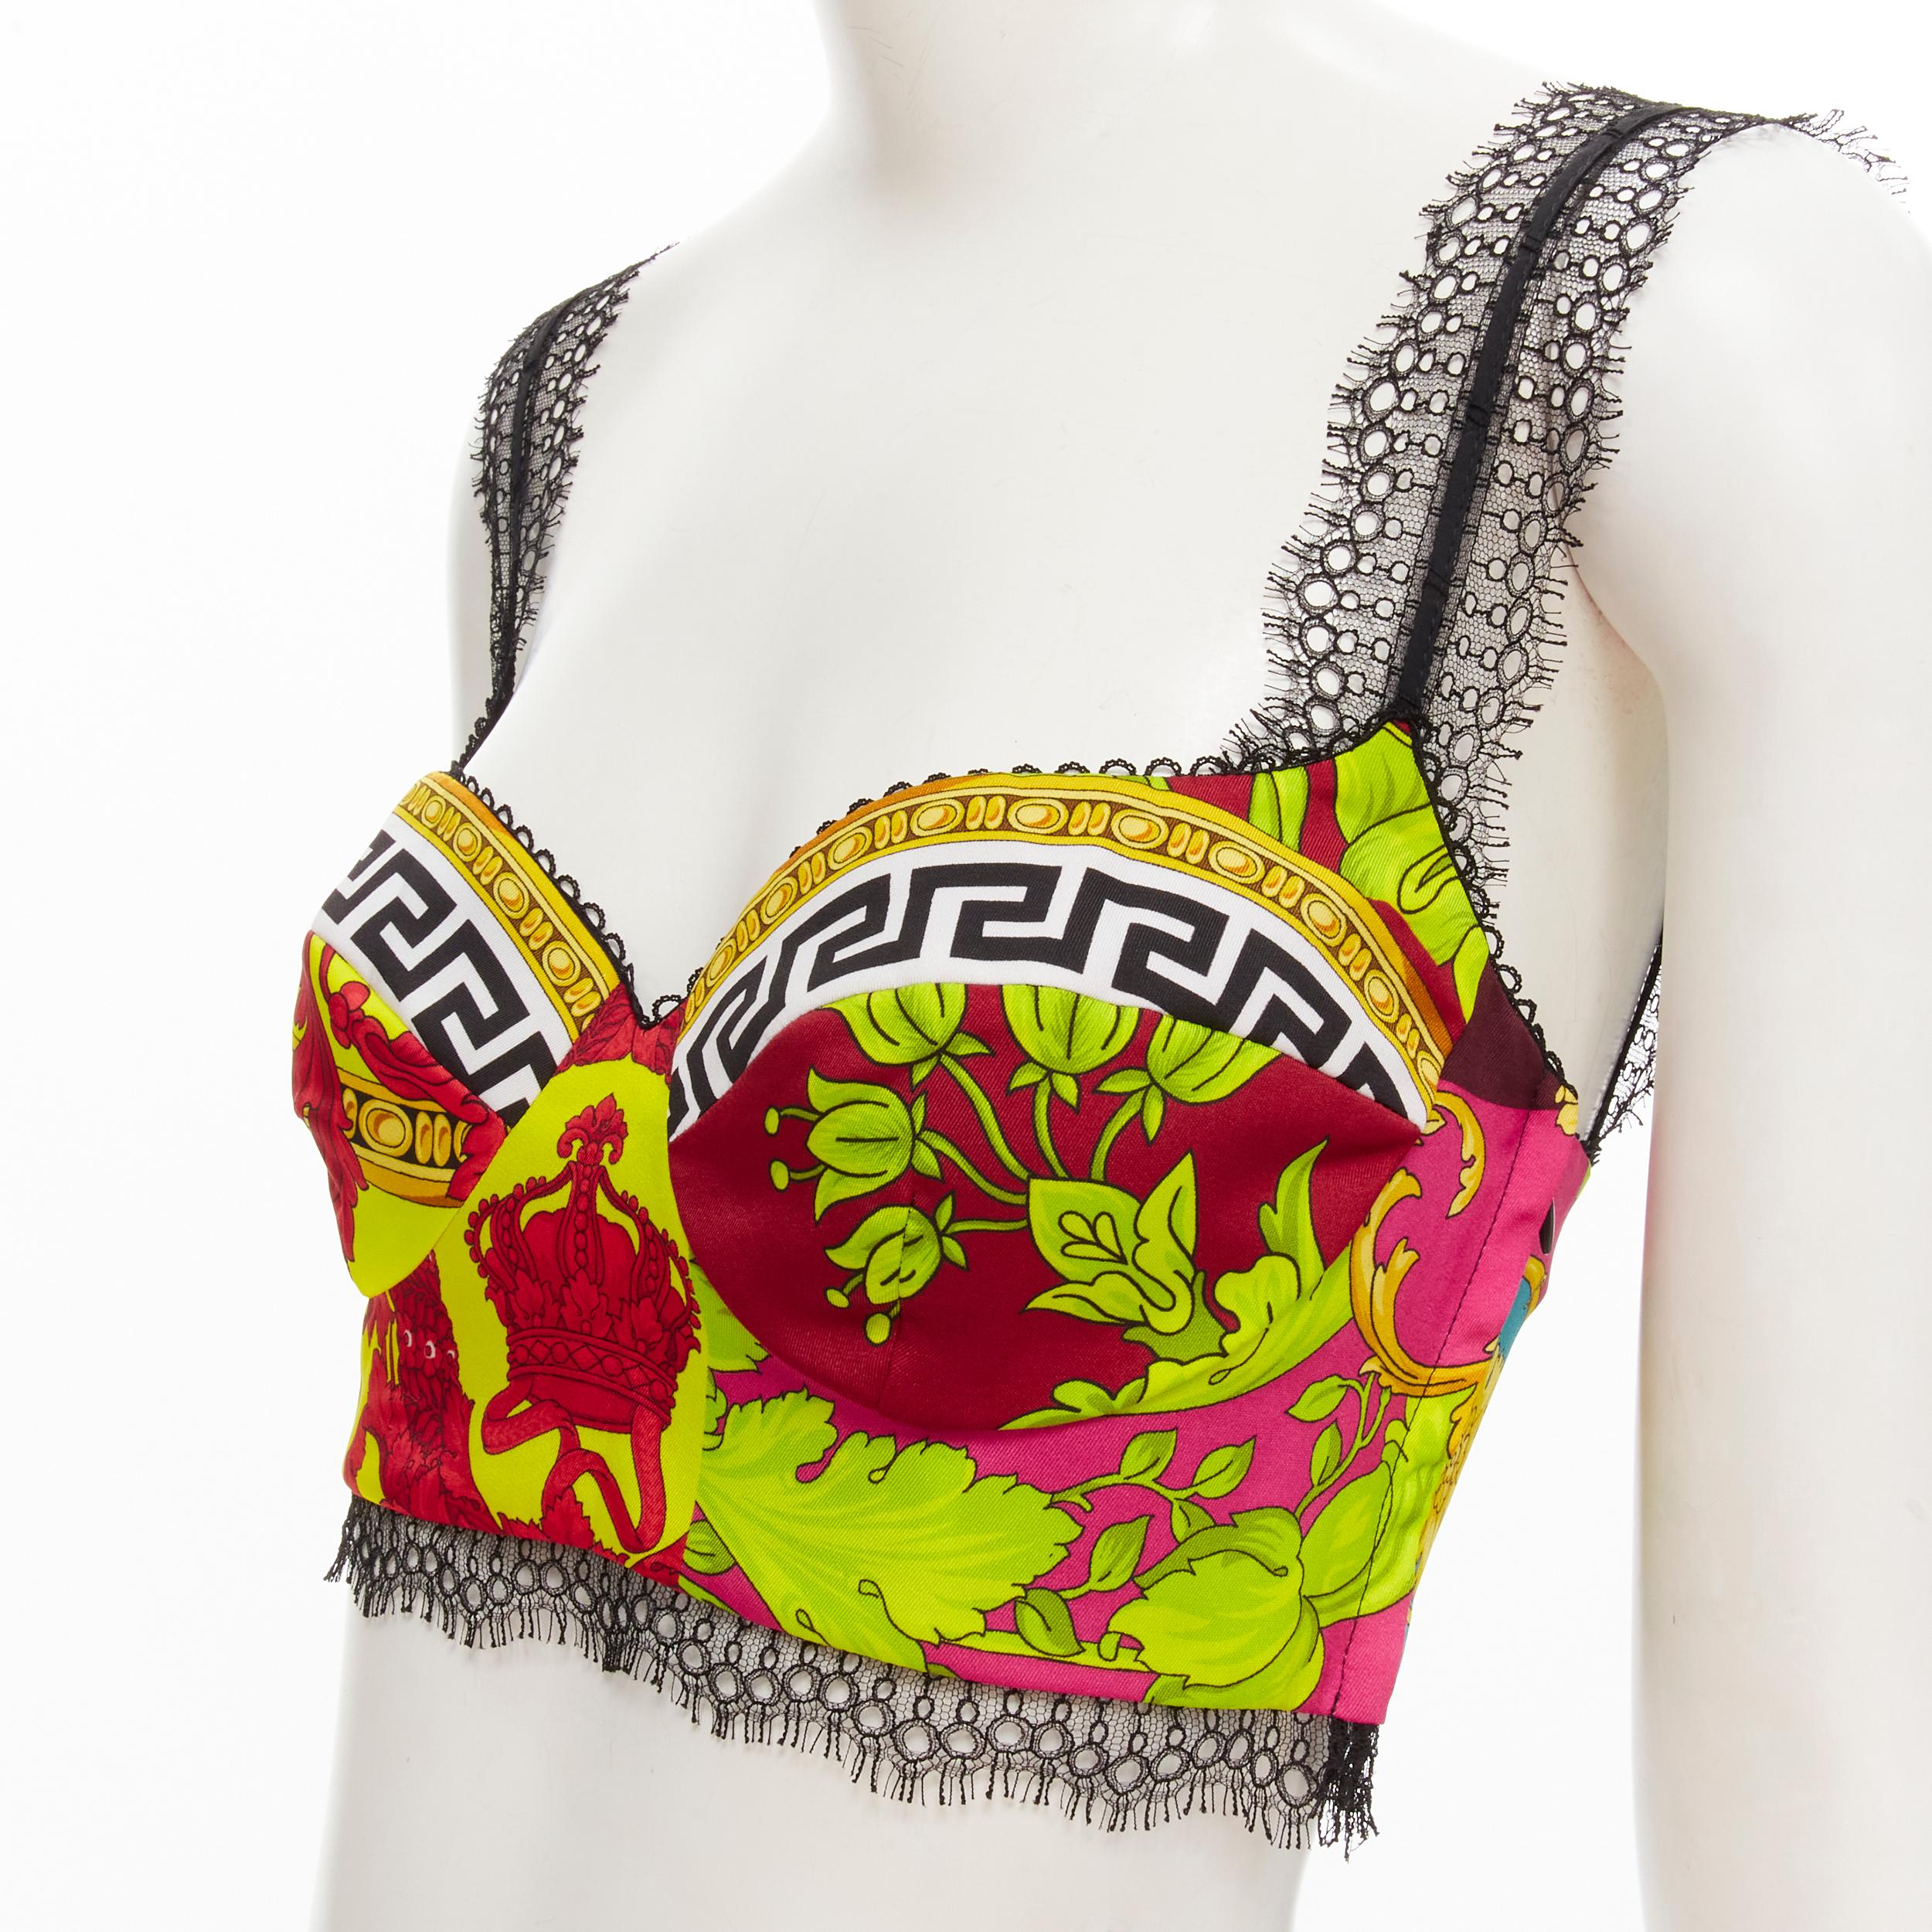 new VERSACE Voyaga Barocco print lace bustier bra top Kylie Jenner IT38 
Reference: CNLE/A00157 
Brand: Versace 
Designer: Donatella Versace 
Collection: Voyage Barocco Runway 
As seen on: Kylie Jenner 
Material: Polyester 
Color: Multicolour